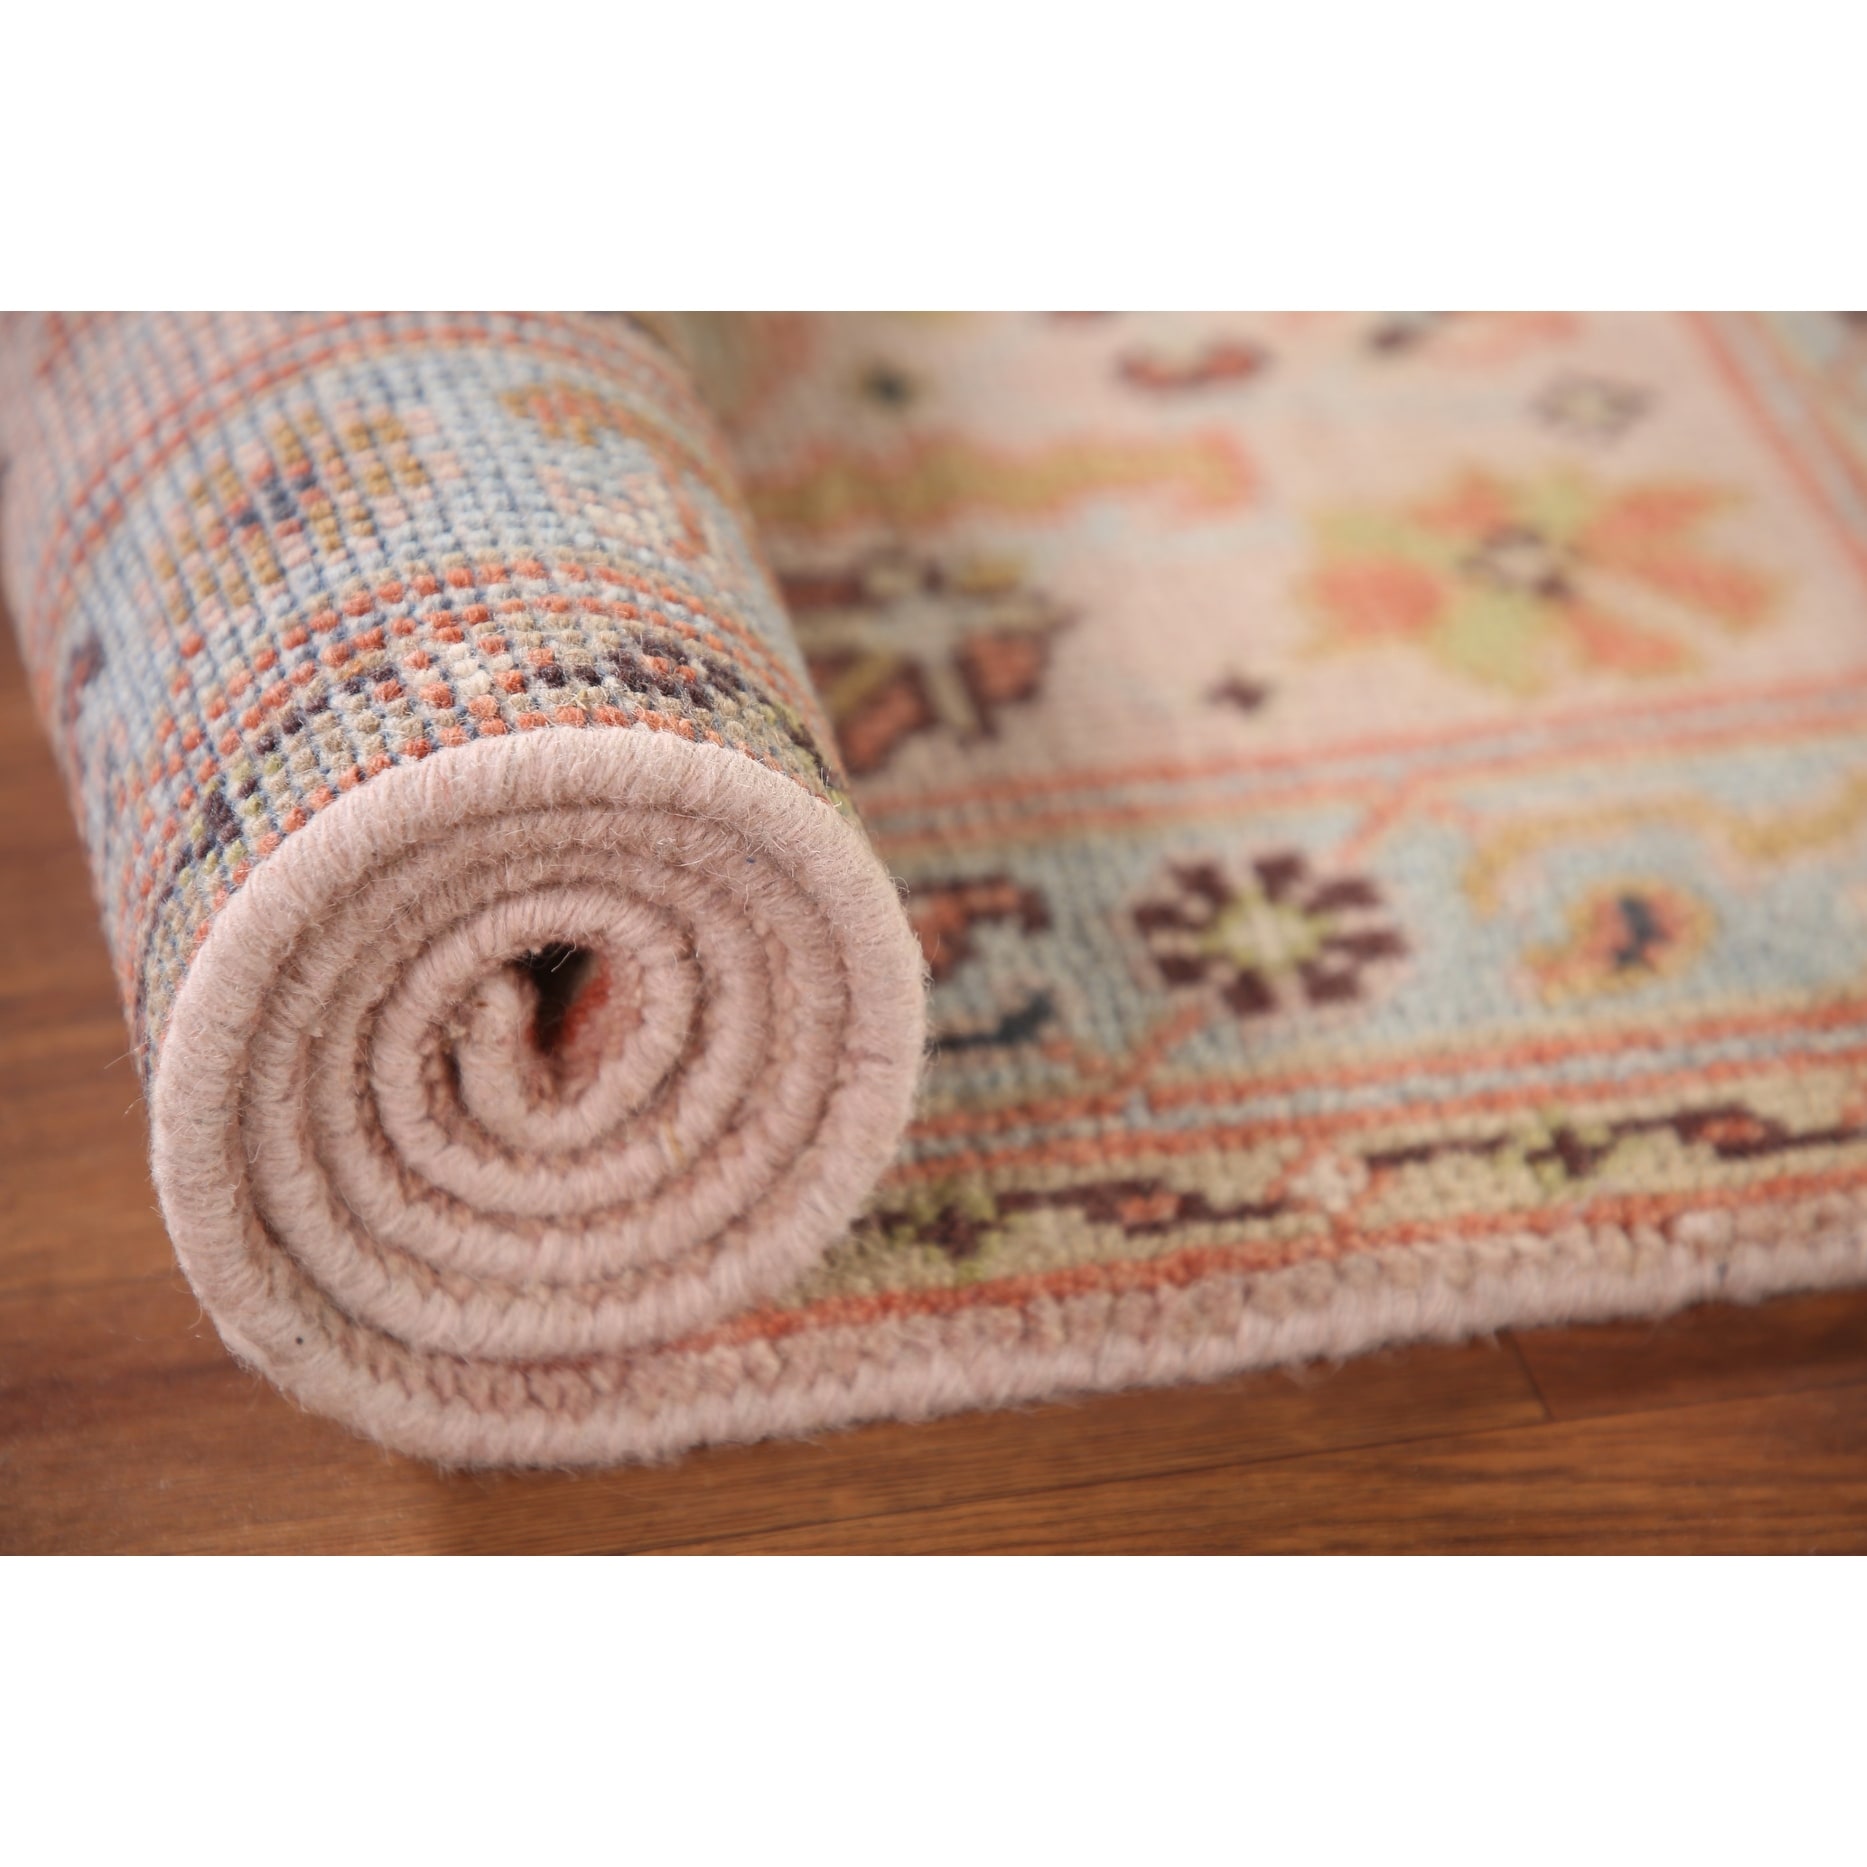 https://ak1.ostkcdn.com/images/products/is/images/direct/86ce4933d066d47ae2d9c7a6c3f8a41a4c7d3c91/Oushak-Accent-Rug-Handmade-Transitional-Pink-Wool-Carpet.jpg